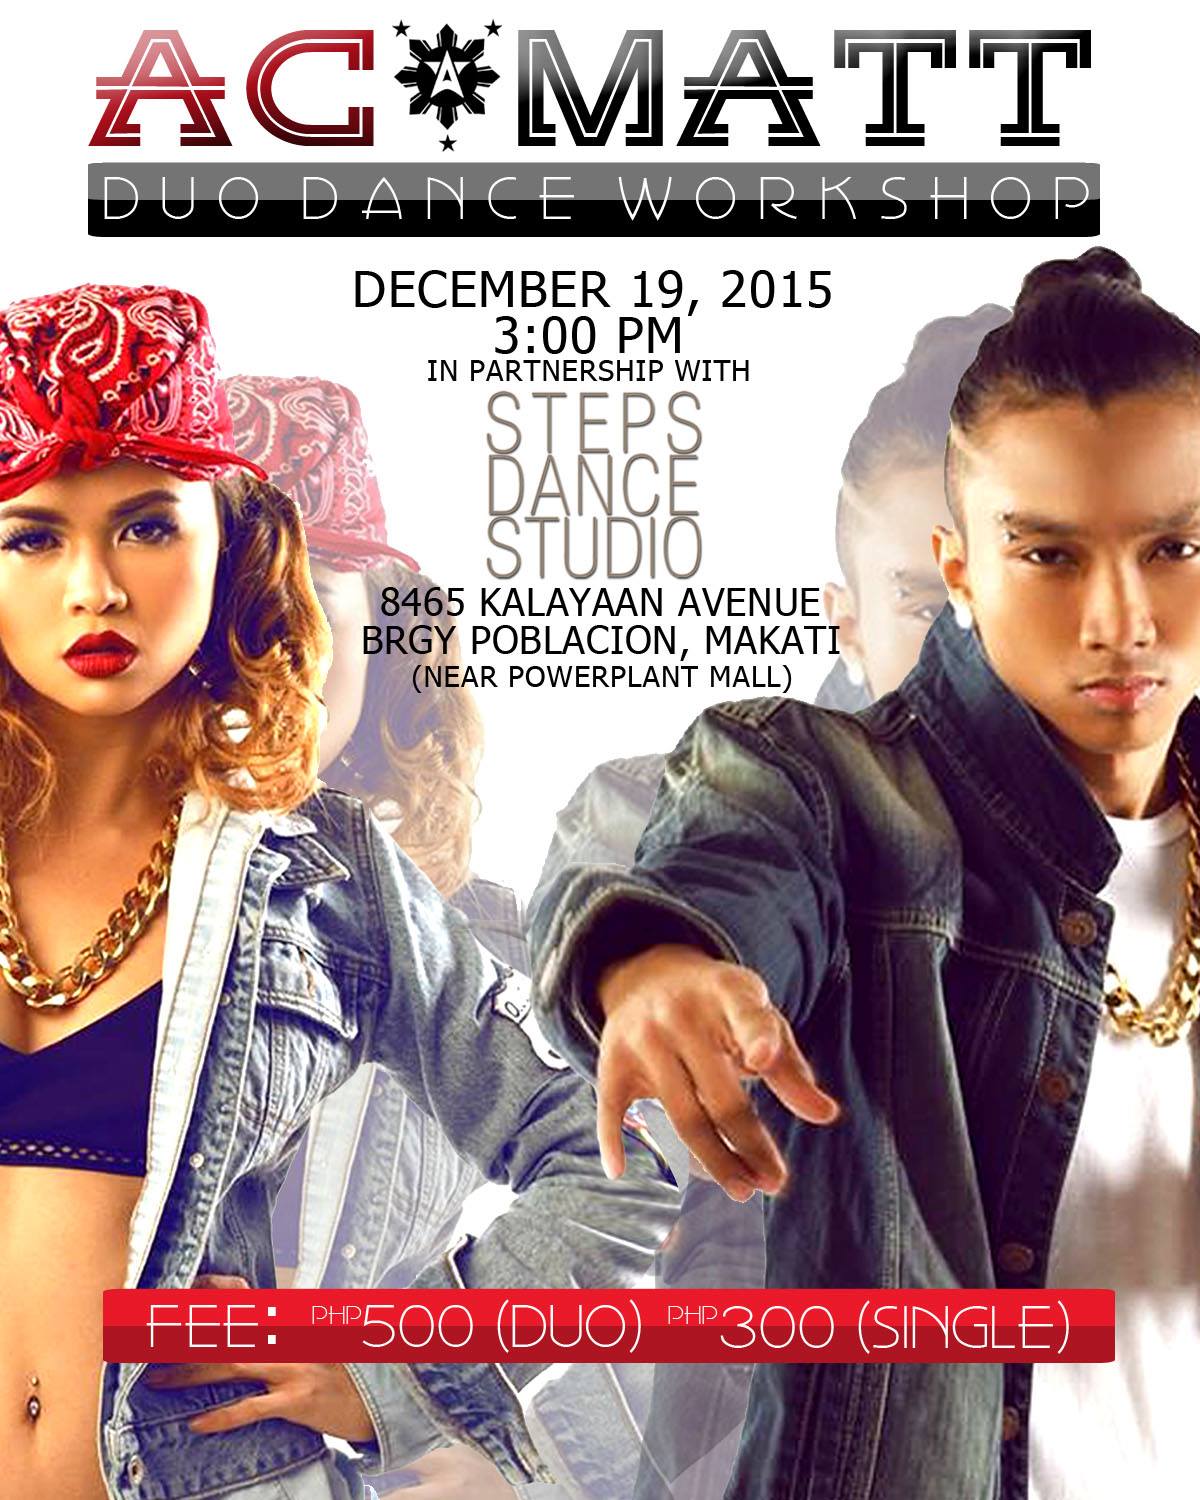 Matt and AC Duo Dance Workshop clock Saturday, December 19 at 3 PM - 5 PM Starts in about 3 hours · 74°F Heavy Rain pin Show Map 8465 Kalayaan Avenue, Barangay Poblacion, Makati City What's good DanceHeads are yal ready?? We're inviting you to our FIRST EVER Duo Dance Workshop happening this December 19th (Saturday) 3:00 PM at Steps Dance Studio. Bring a Dance Partner for a better experience :) But you can also take our class alone, it's up to you!!! Class fee is 500 (for 2 people/partners) and 300 (Single). There will be limited slots only so, secure your 'em now! This will be our Year-end Dance Workshop and if it turns out great, there will be more to come for sure, so we hope to see yal there! :) Turn it up! #DuoDanceWorkshop #MattPadilla #ACLalata #MattAndAC #PhilippineAllstars #Dance #StepsDanceStudio Please leave your name and indicate if you're coming as a "DUO" or "SINGLE", Php 50 discount for the ones with partners and regular price for single peeps! :) Much Love and God bless!